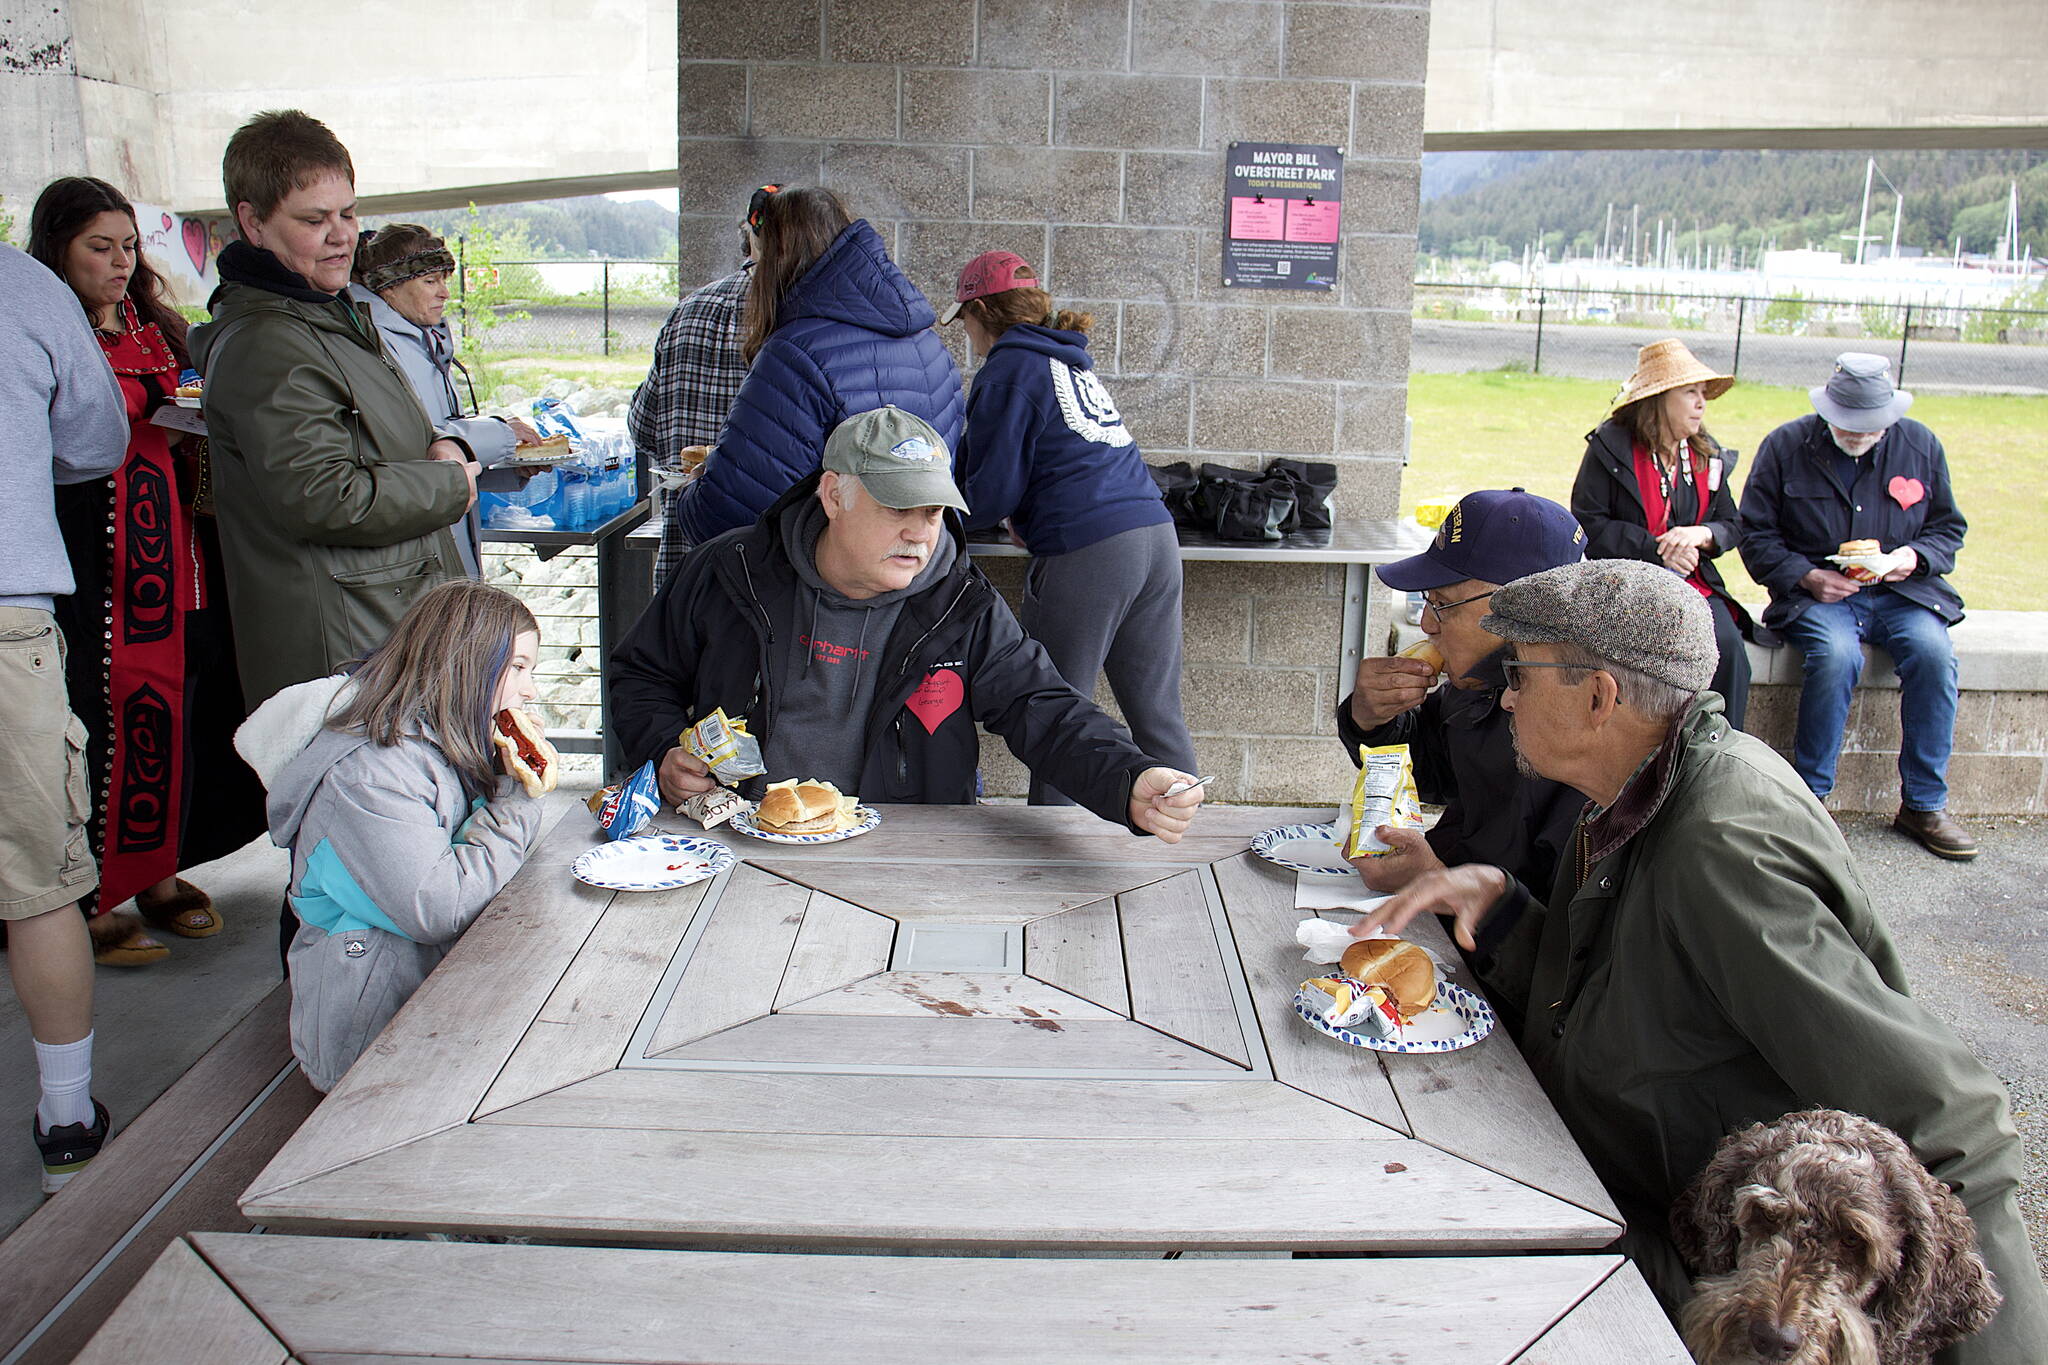 Local residents from a diverse range of ages and cultures gather for a cookout Sunday at Bill Overstreet Park after participating in an annual walk celebrating National Cancer Survivors Day. (Mark Sabbatini / Juneau Empire)